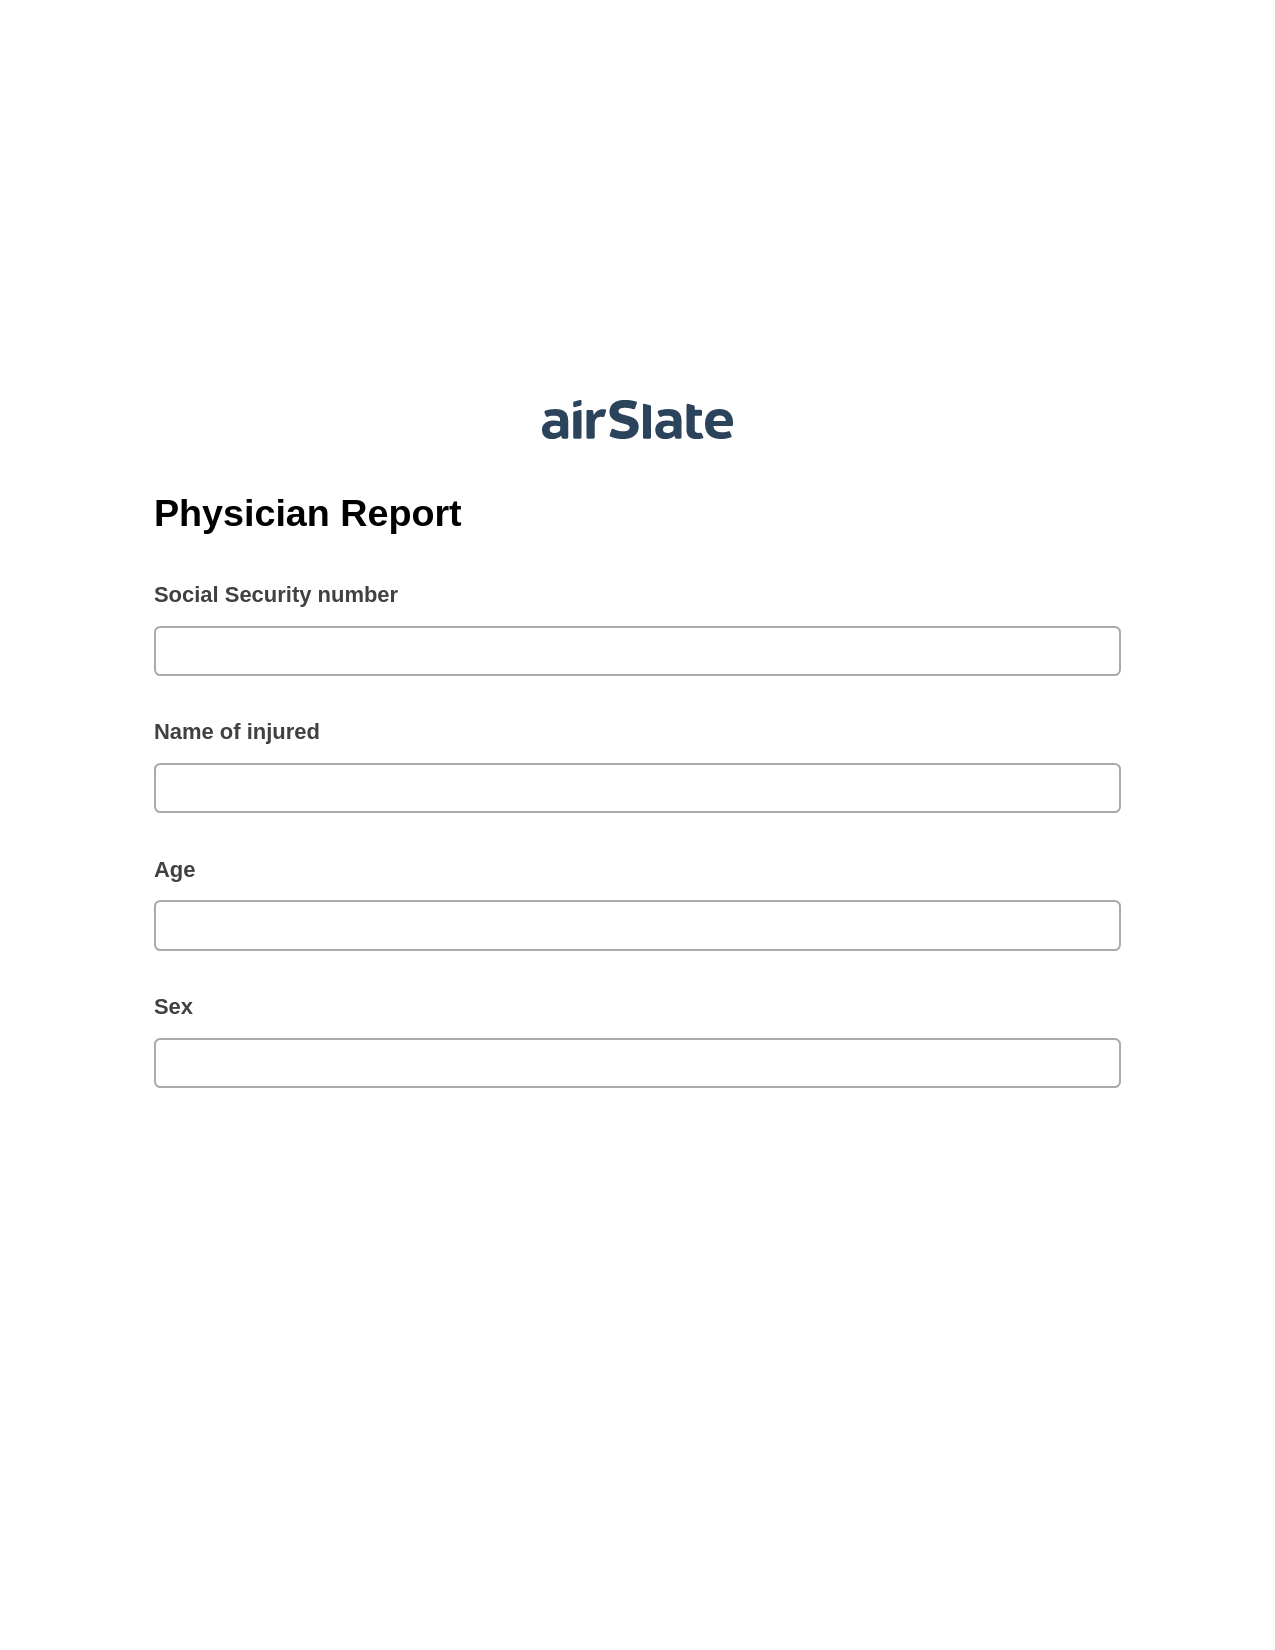 Physician Report Pre-fill from CSV File Bot, Lock the Slate Bot, Archive to Dropbox Bot